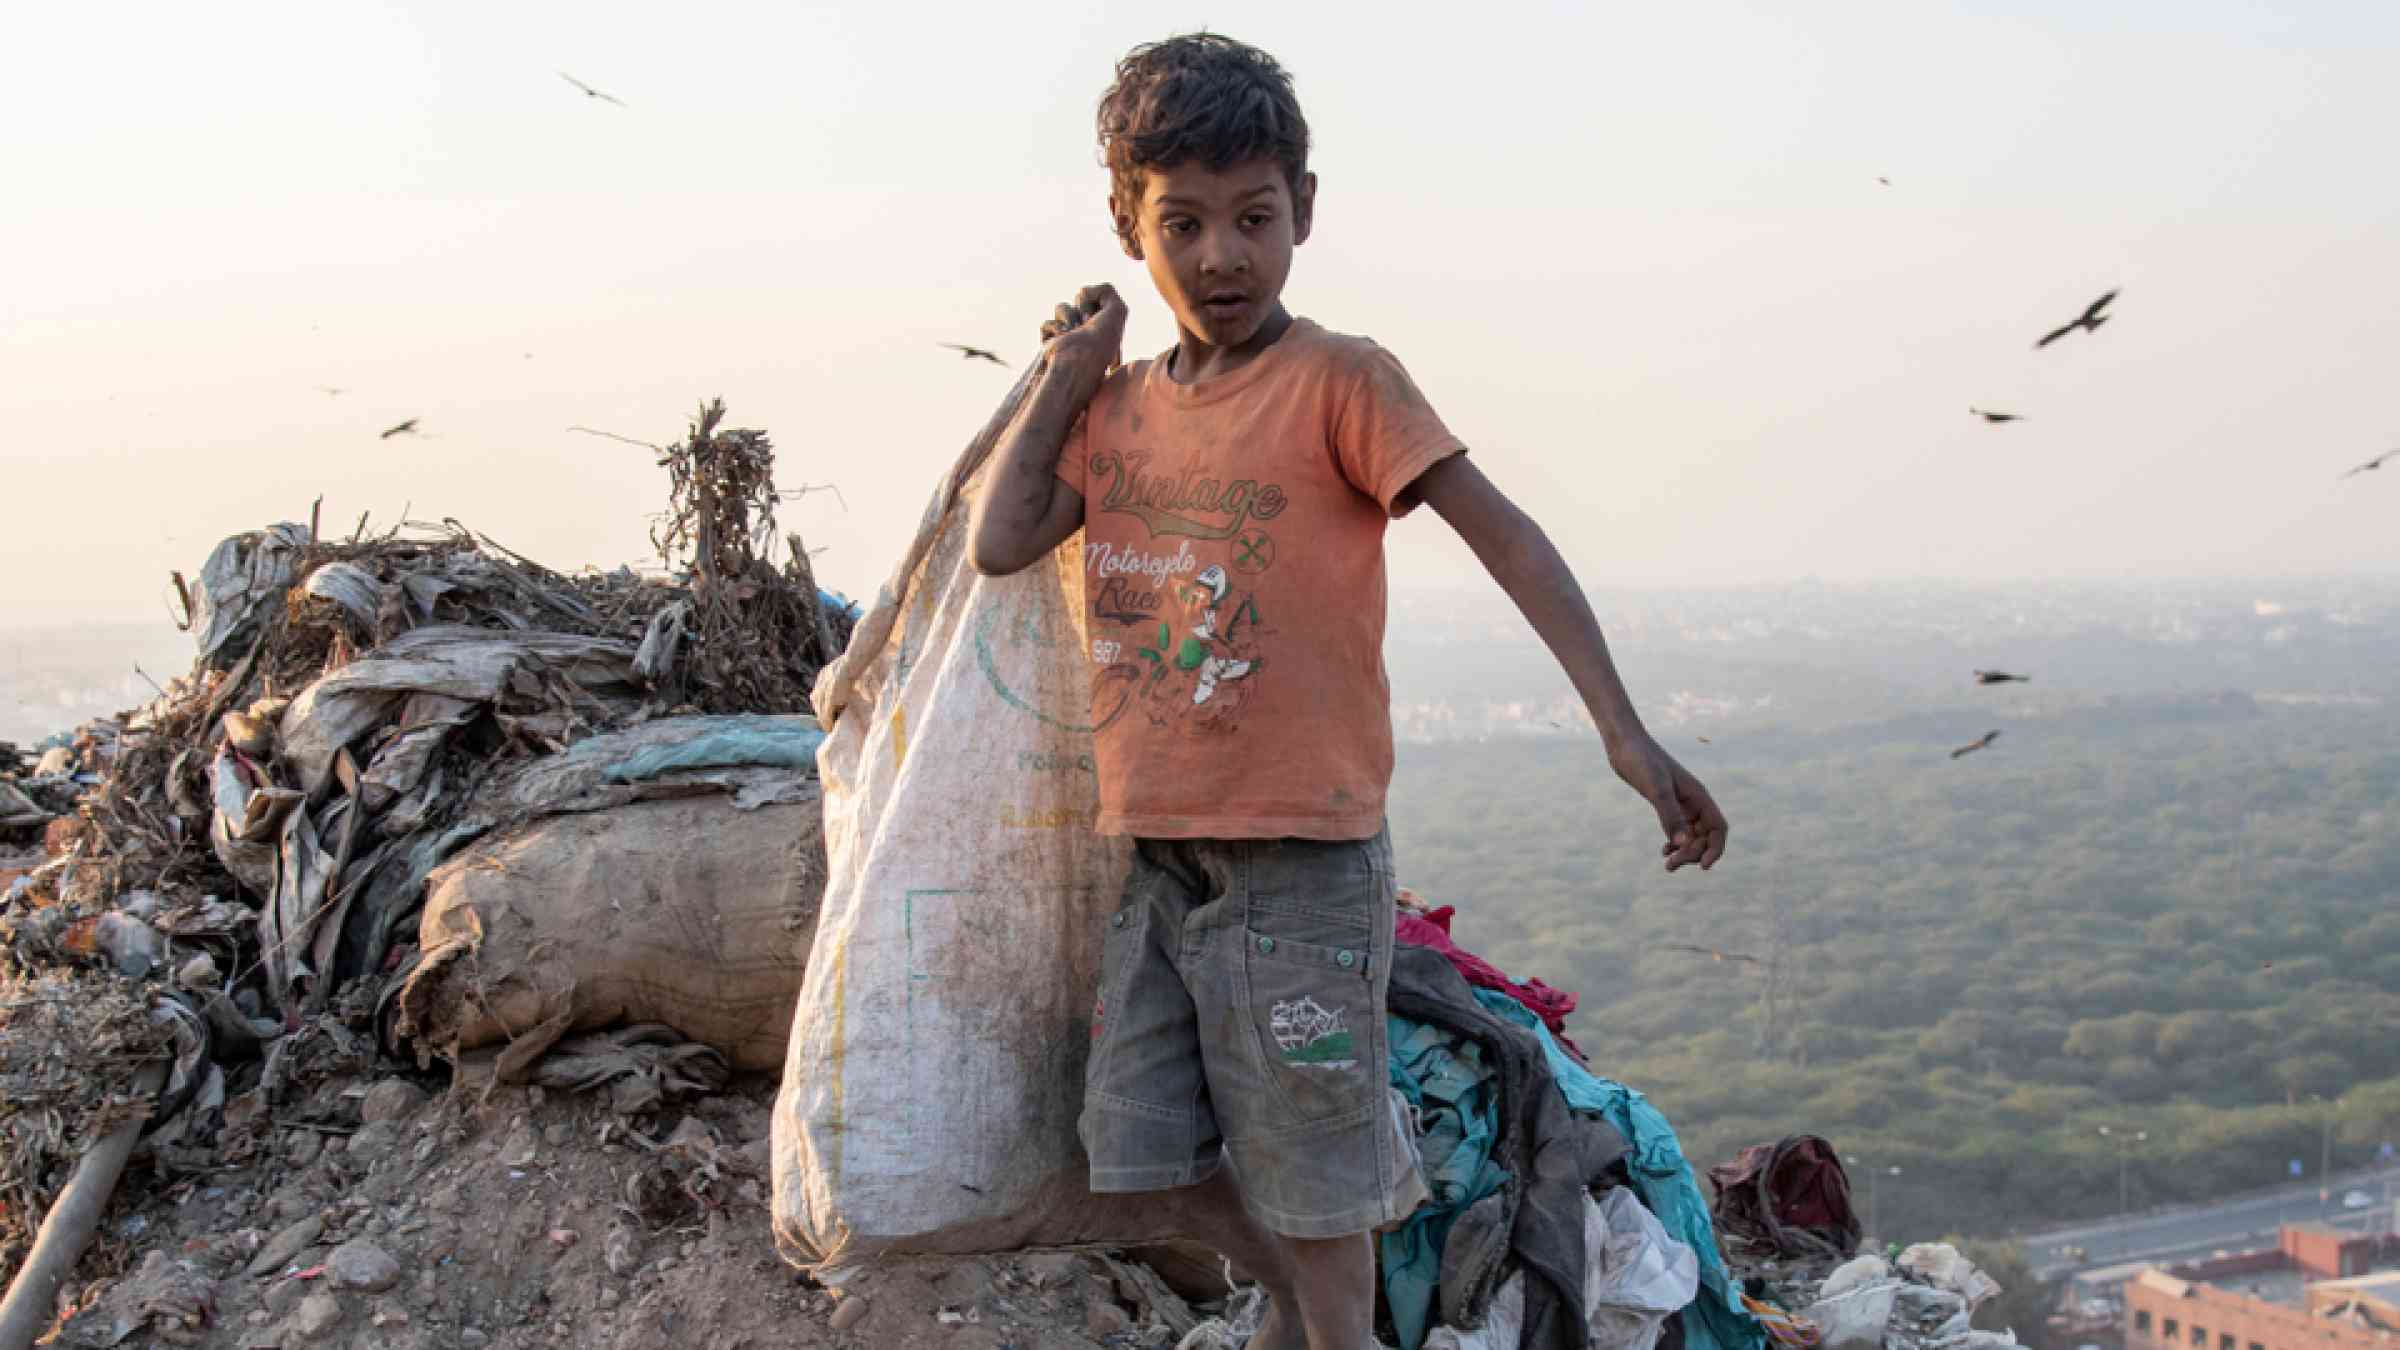 A poor boy collecting garbage waste from a landfill site in the outskirts of Delhi. Hundreds of children work at these sites to earn their livelihood.